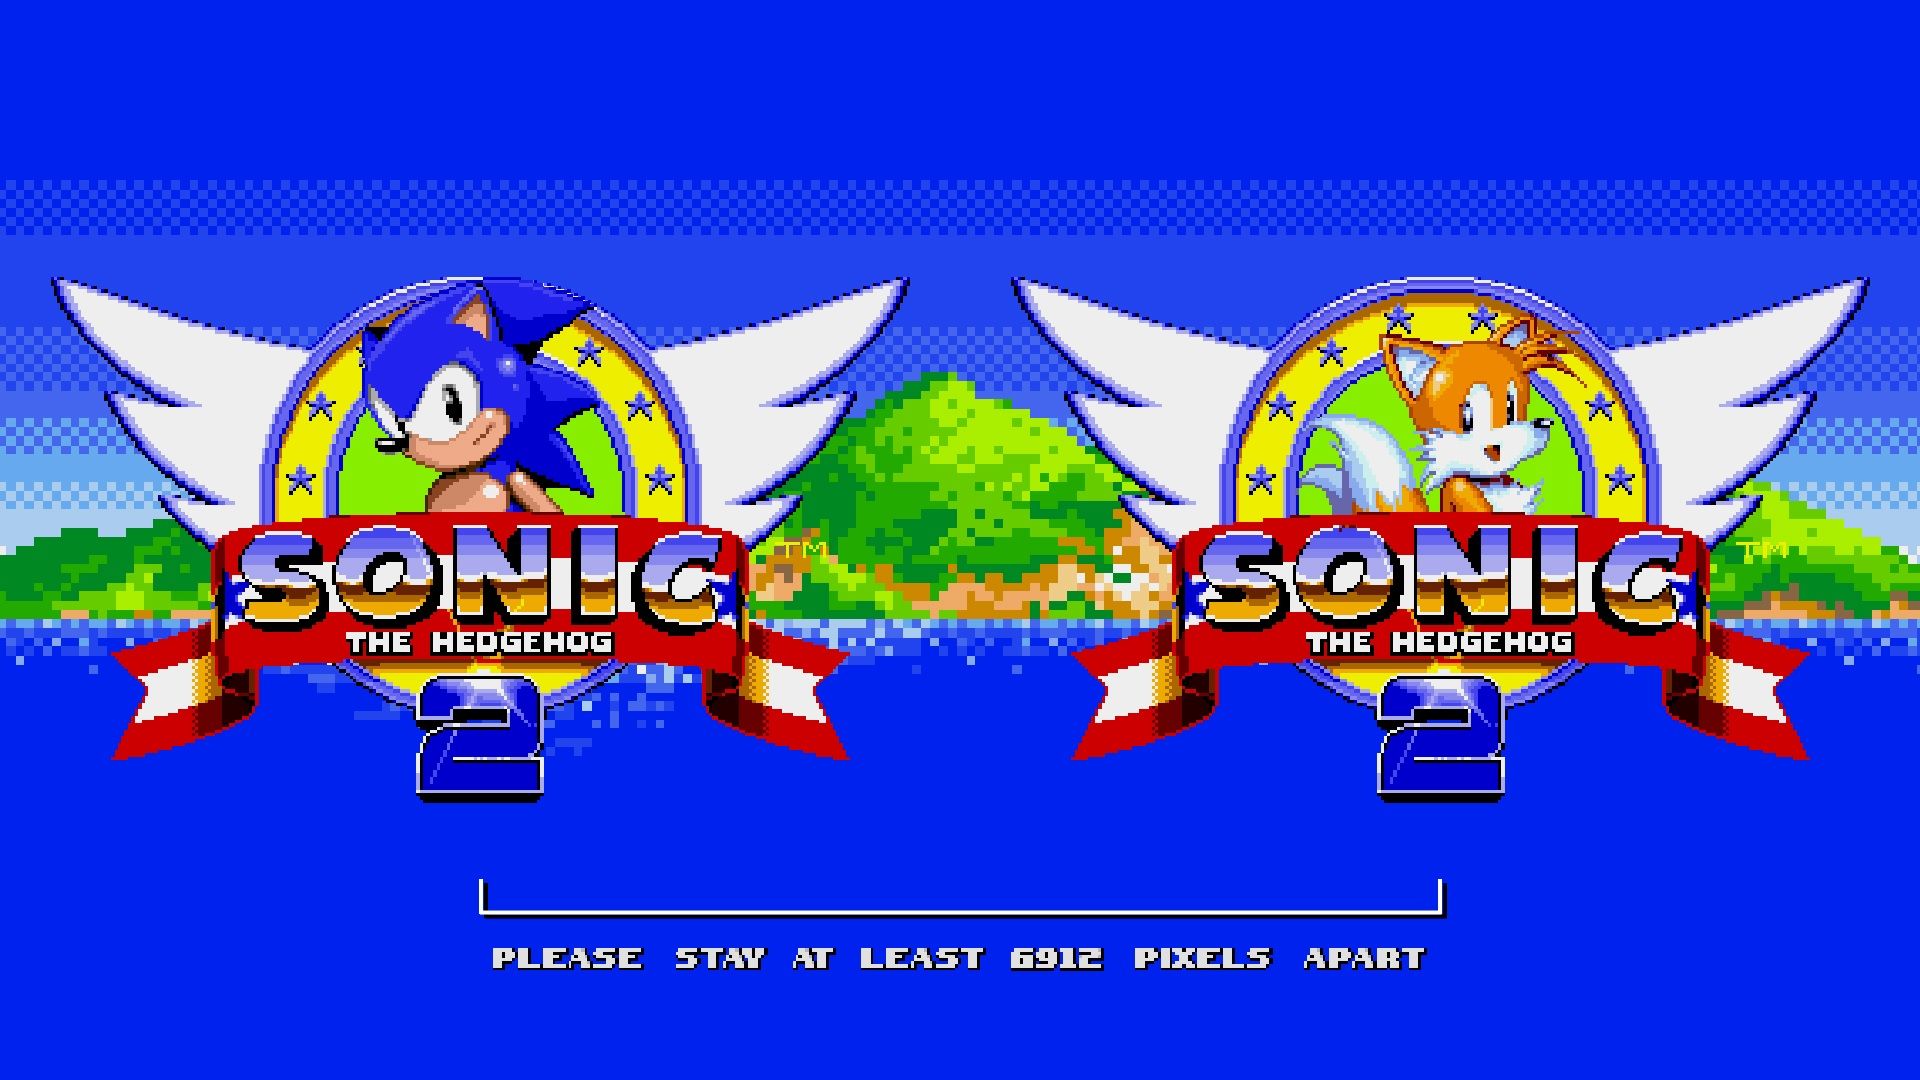 Sonic the Hedgehog 2 Art and Giphy Stickers Shared for Social Distancing